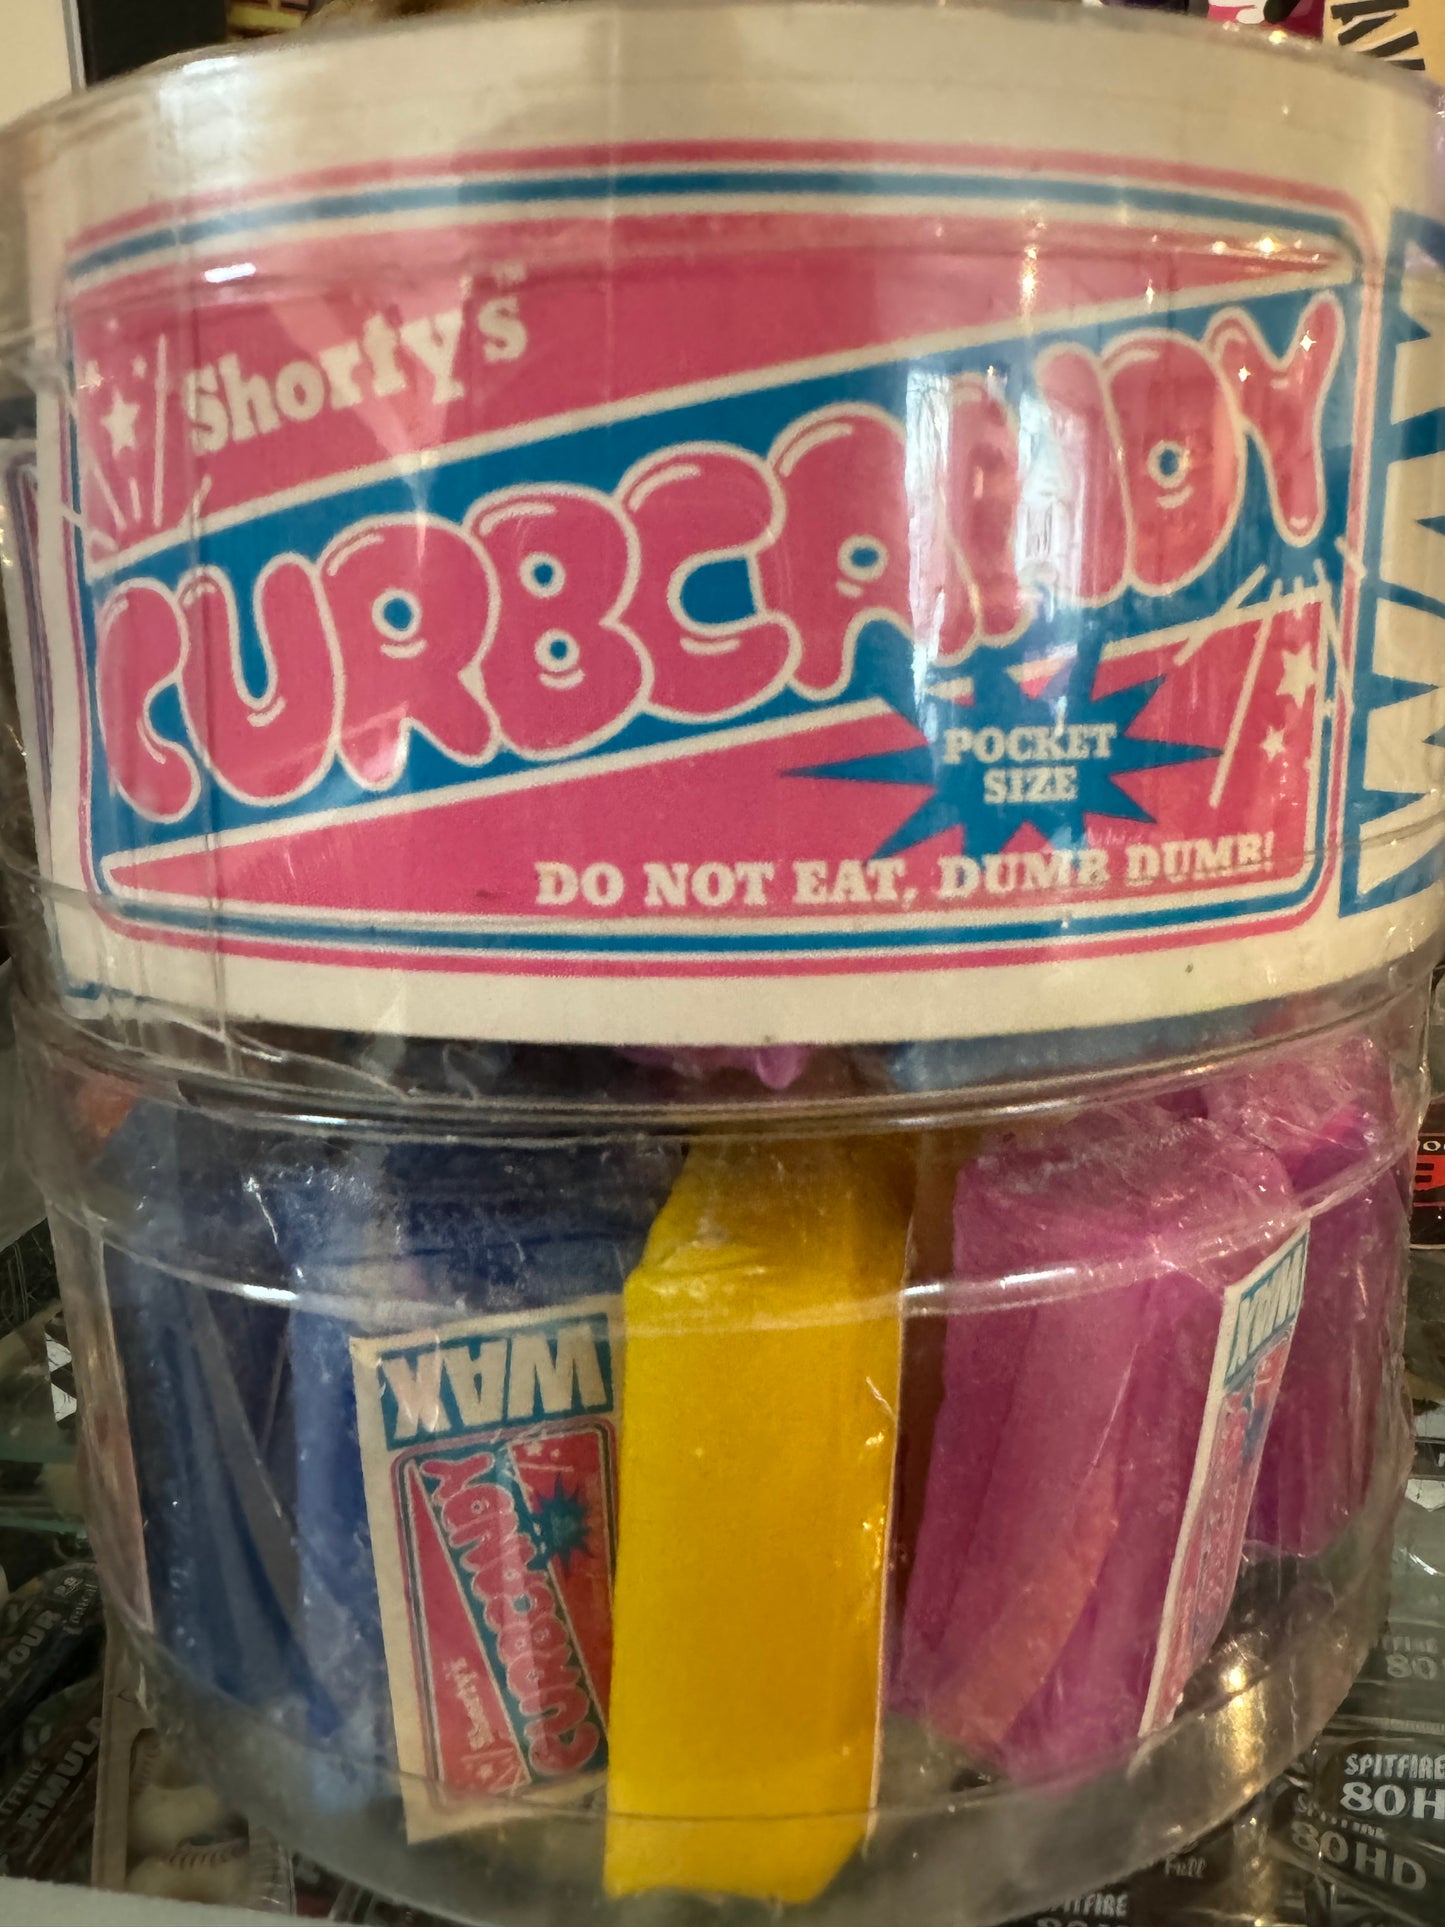 Shorty's Curb Candy